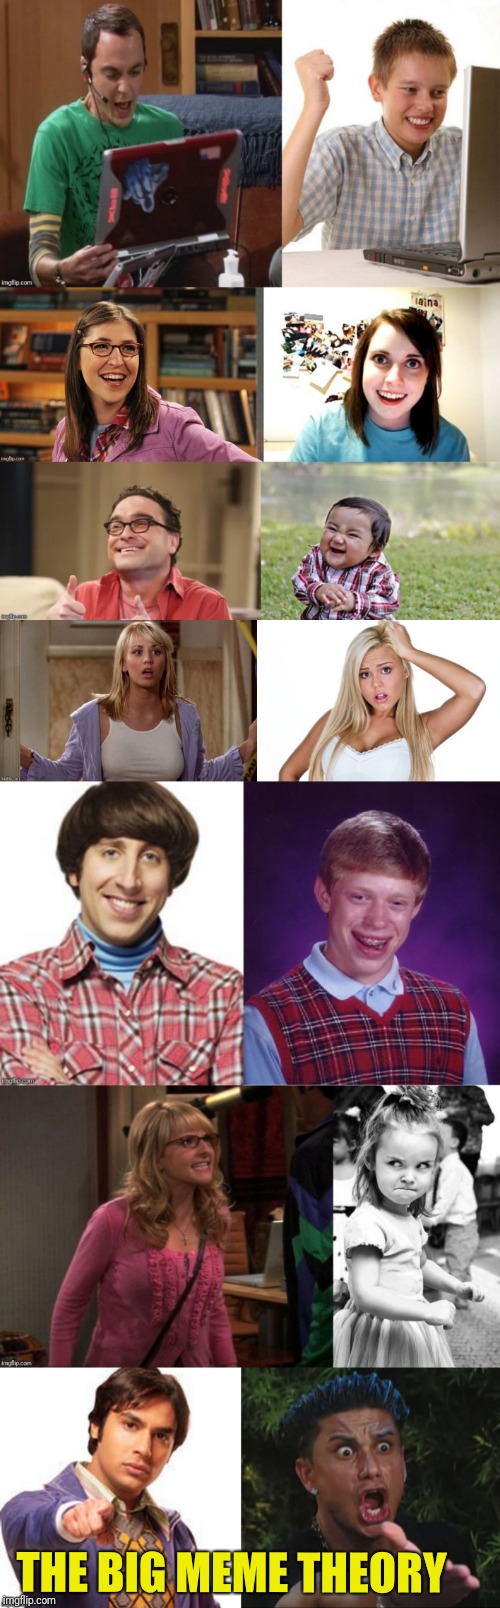 The Dysfunctional Brady Bunch | THE BIG MEME THEORY | image tagged in memes,sheldon cooper,the big bang theory,bad luck brian,dj pauly d,dumb blonde | made w/ Imgflip meme maker